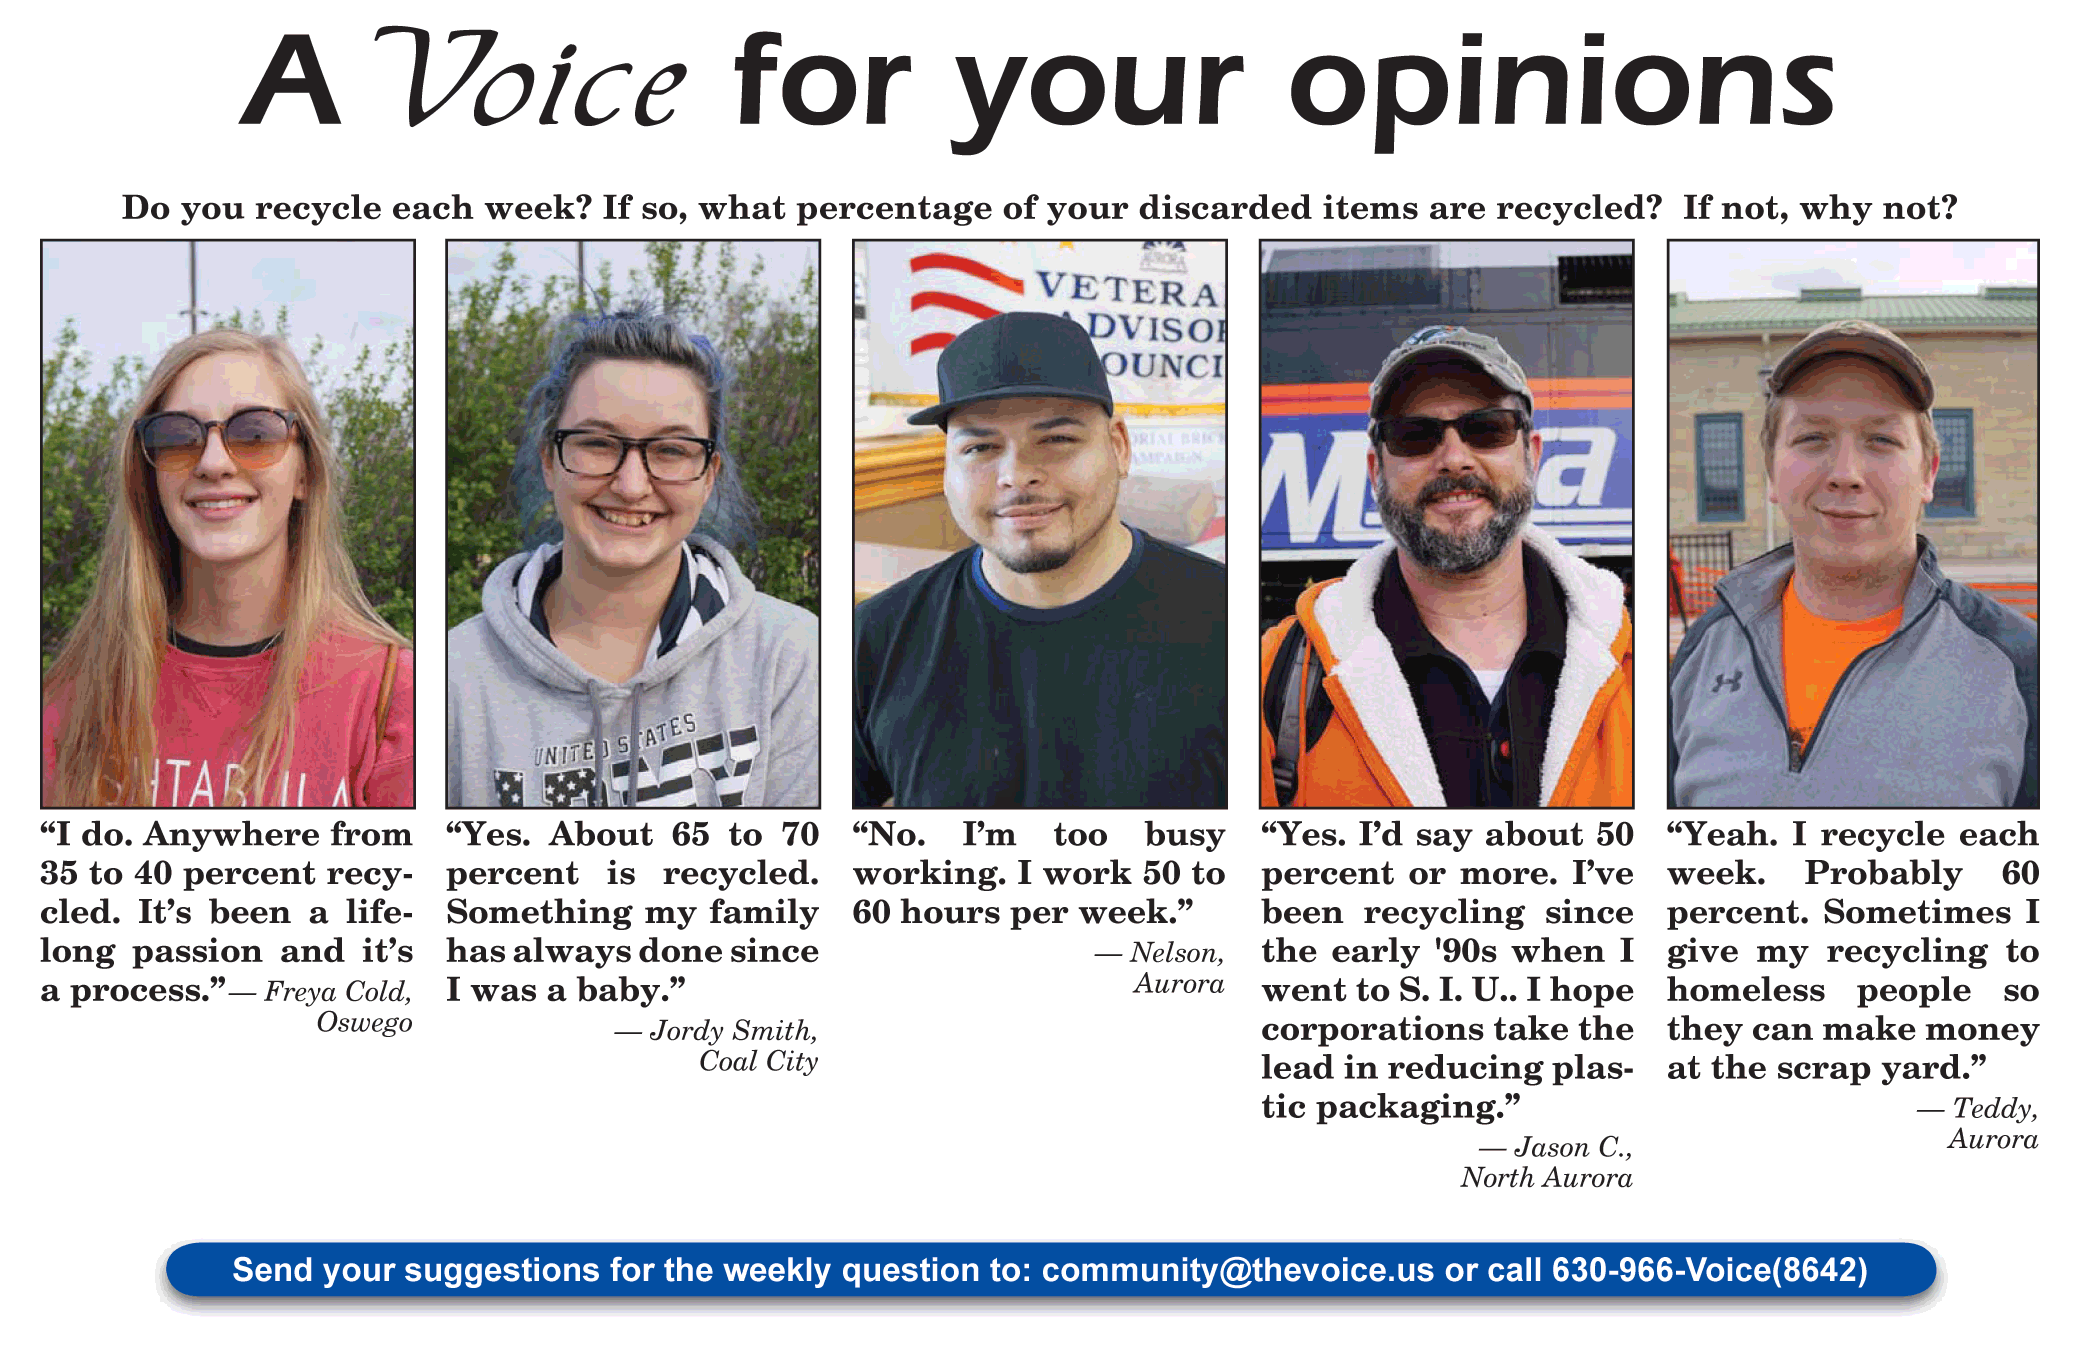 A Voice For Your Opinions - April 25, 2019